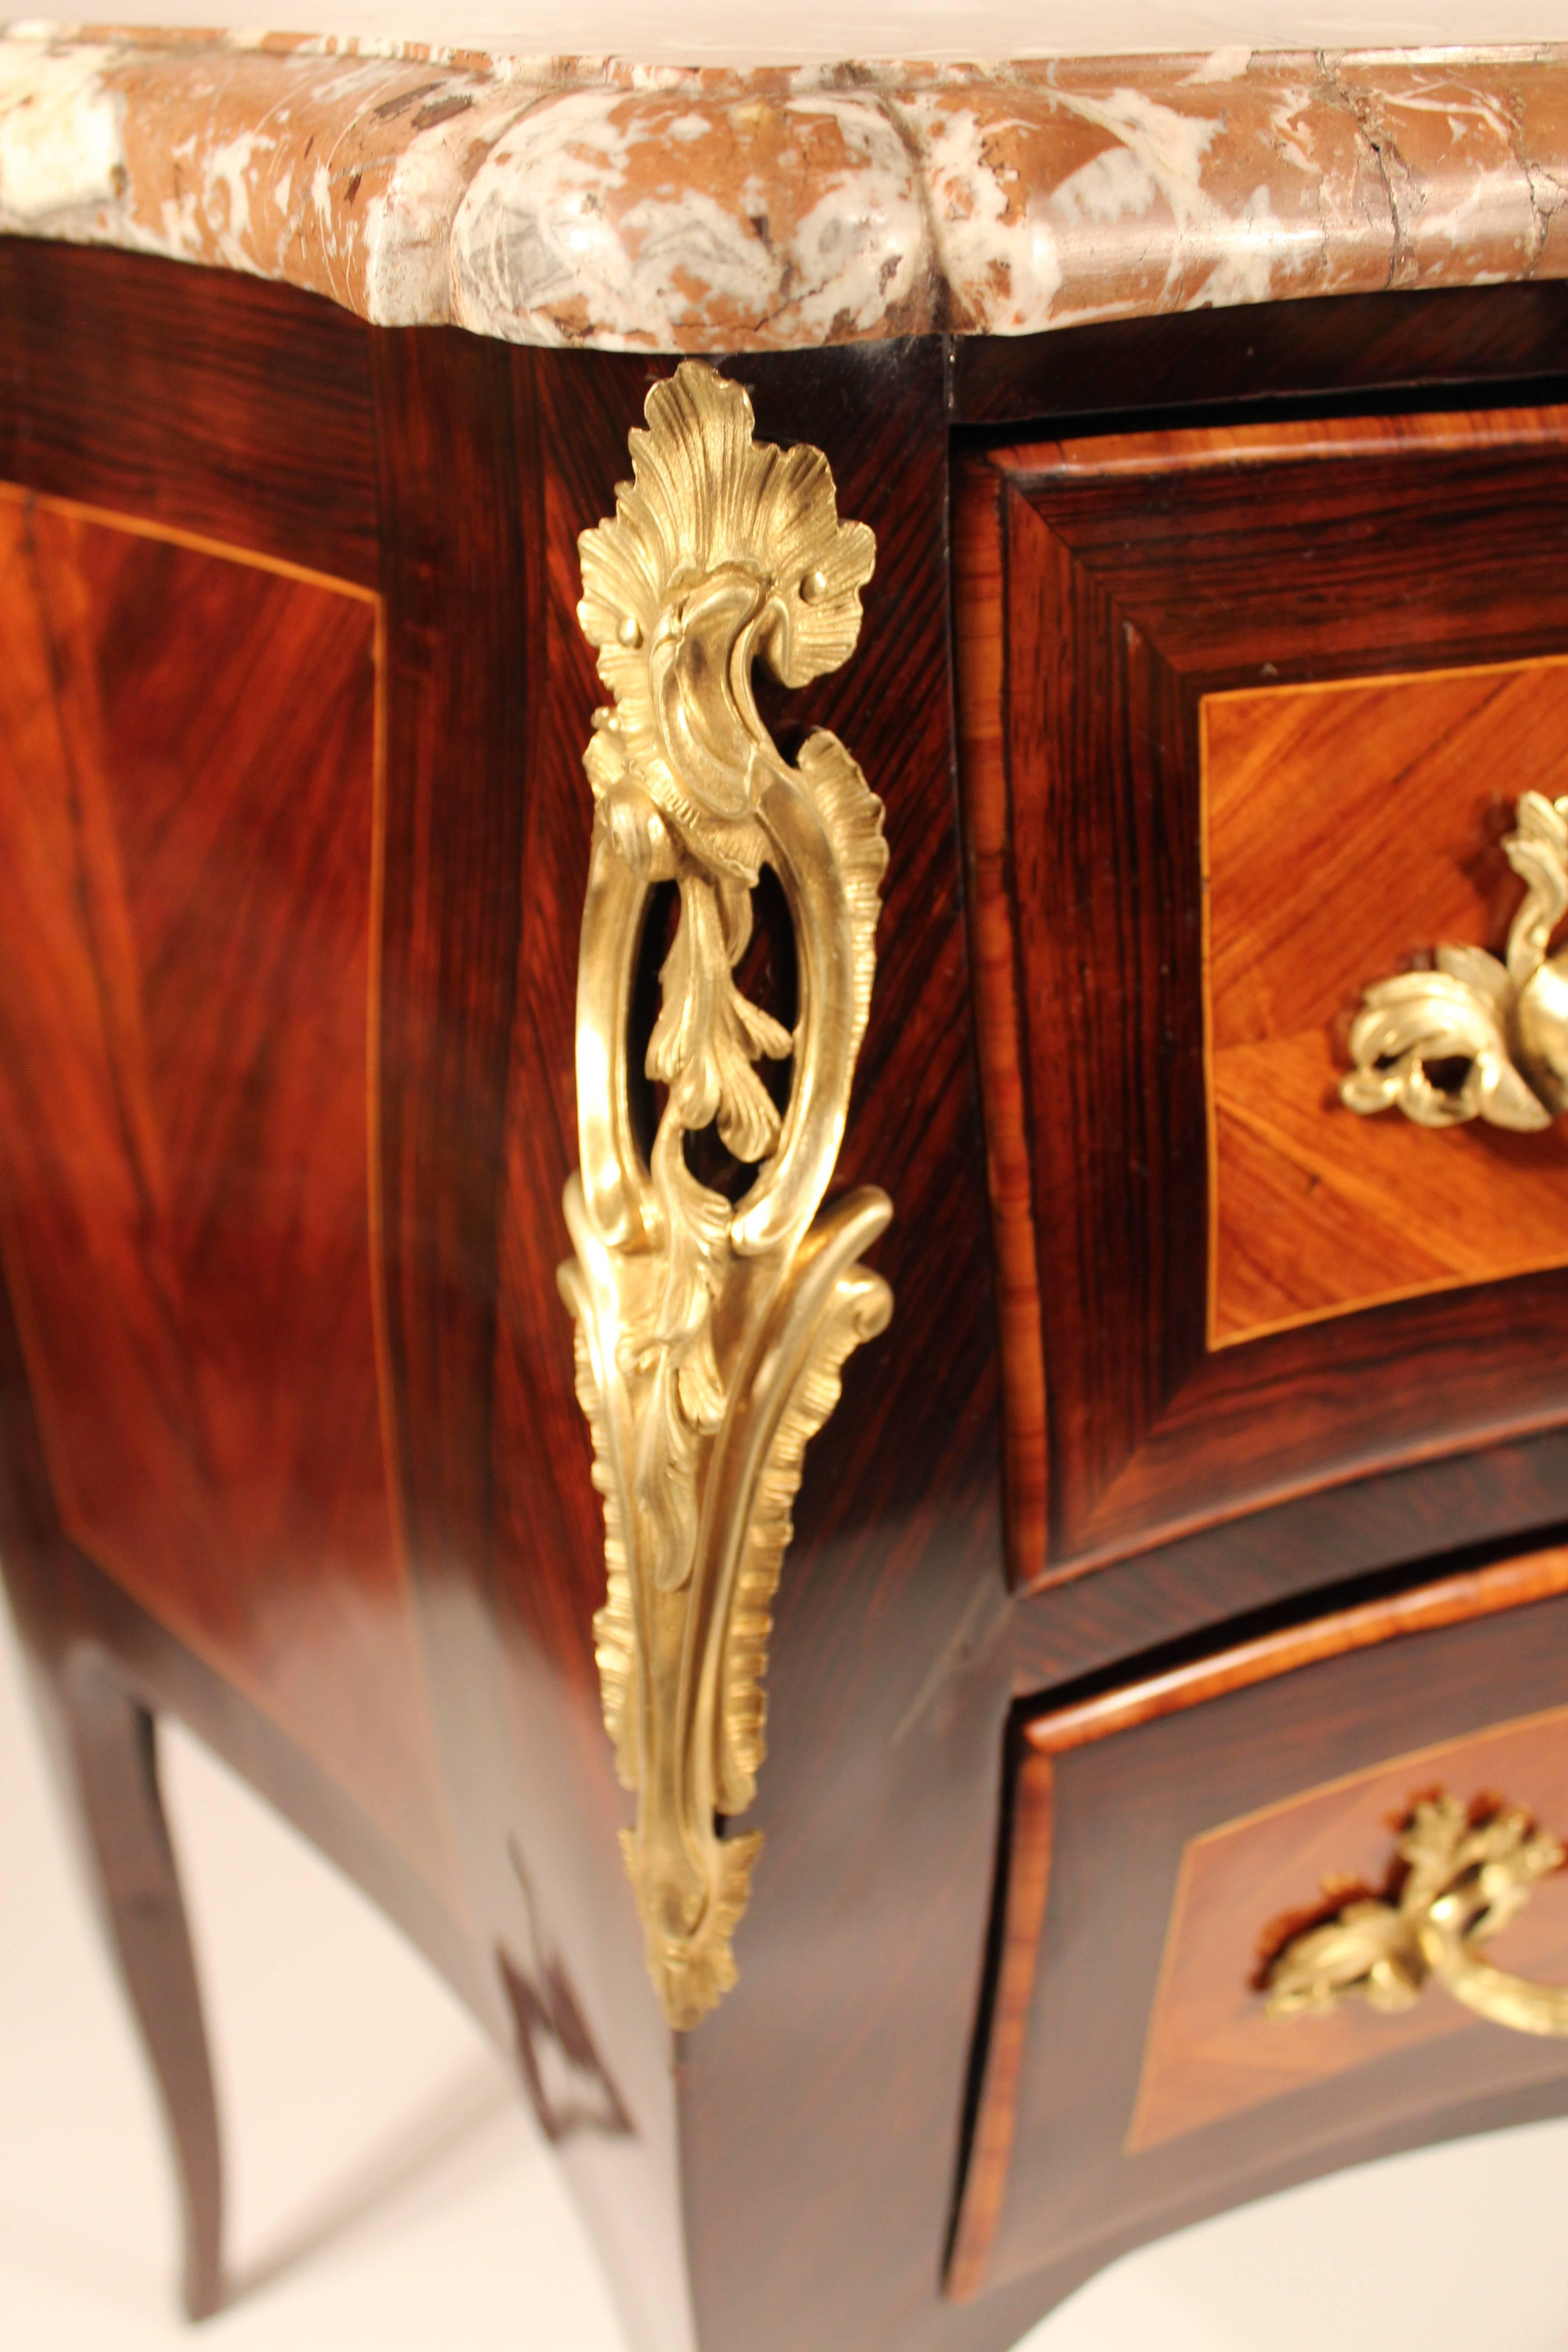 Fine Louis XV commode raised on tapering legs with scrolled caps. Bombé front with three drawers, one large and two smaller ones on the upper part. Brilliantly grained rosewood and kingwood veneer with gold-plated bronze fittings, beautifully formed